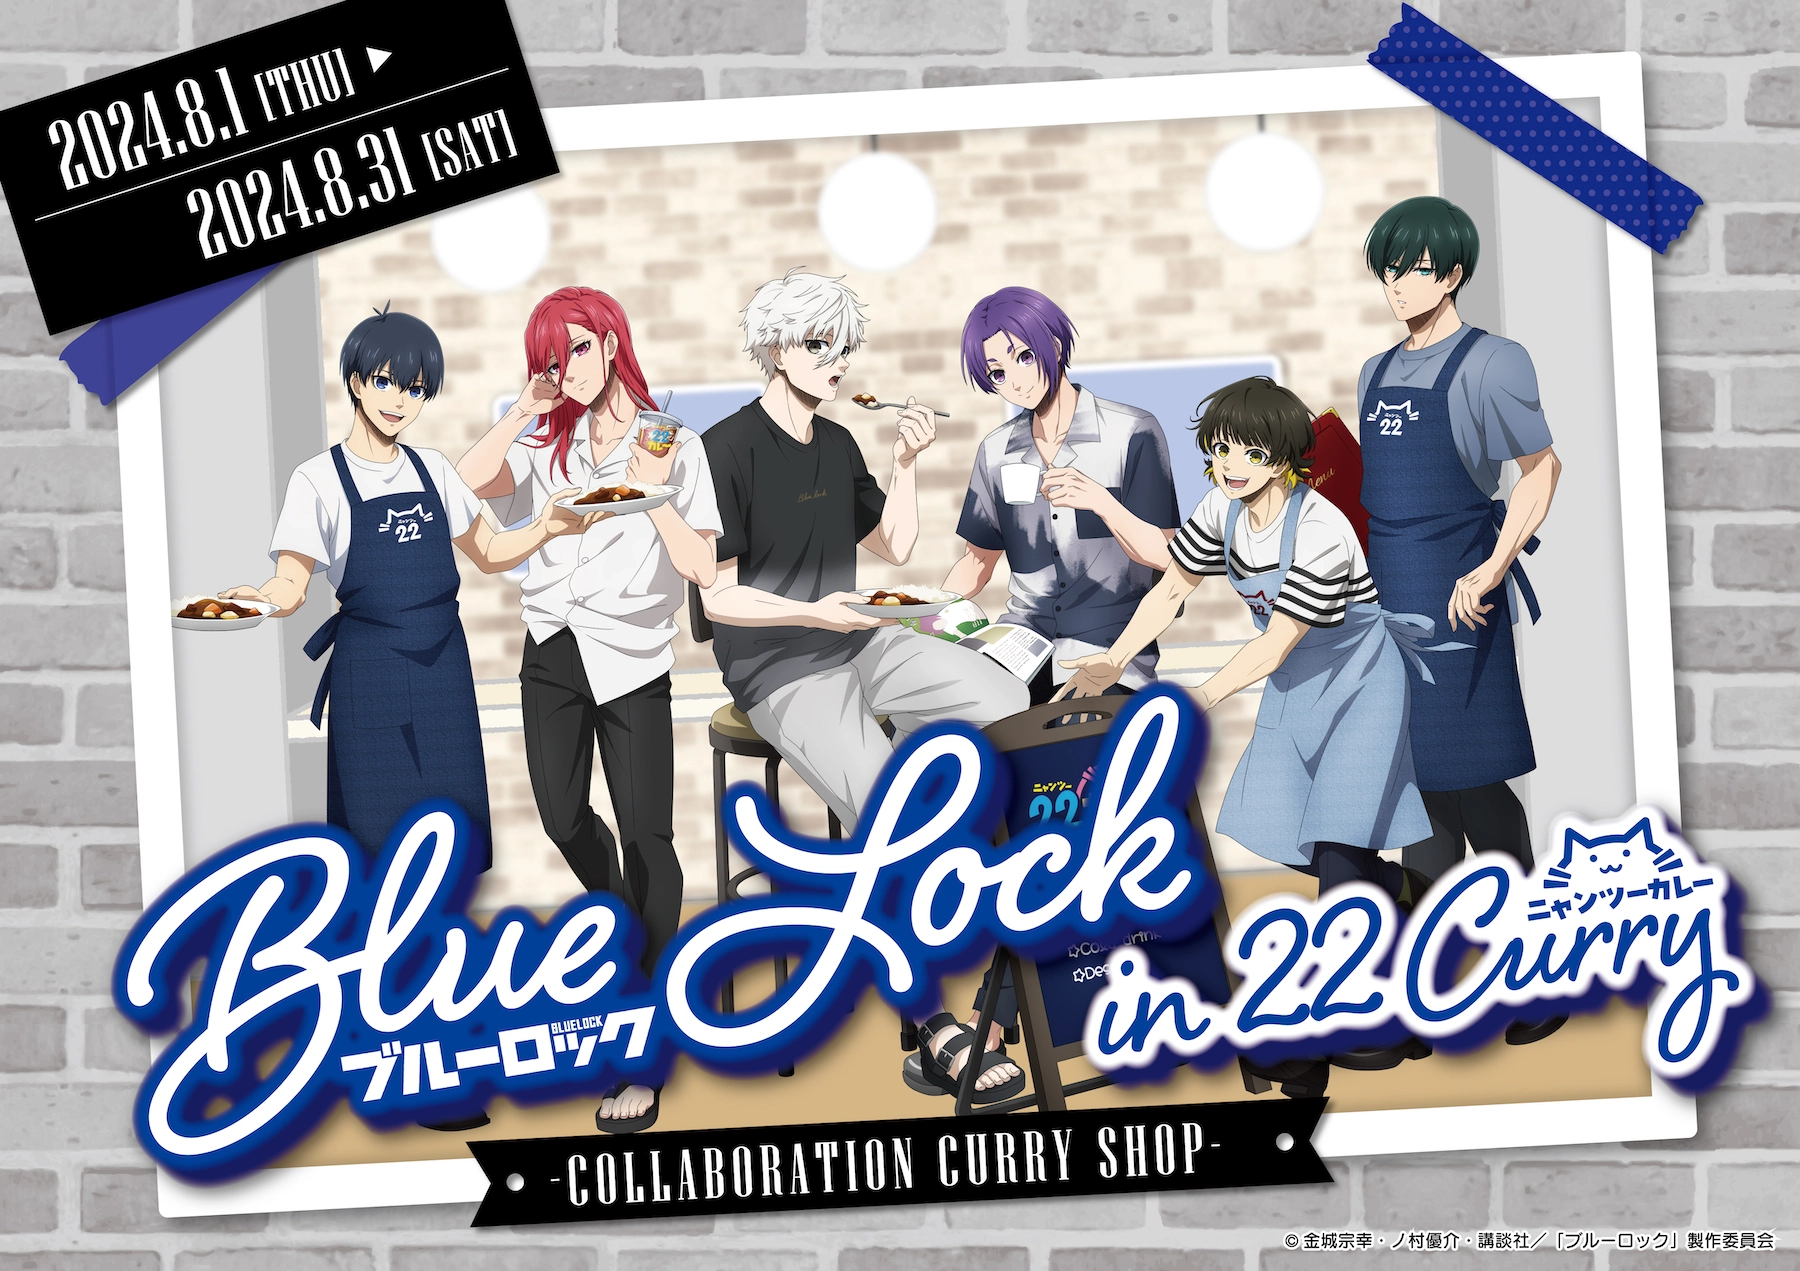 Anime BLUE LOCK pop-up store in 22 Curry!